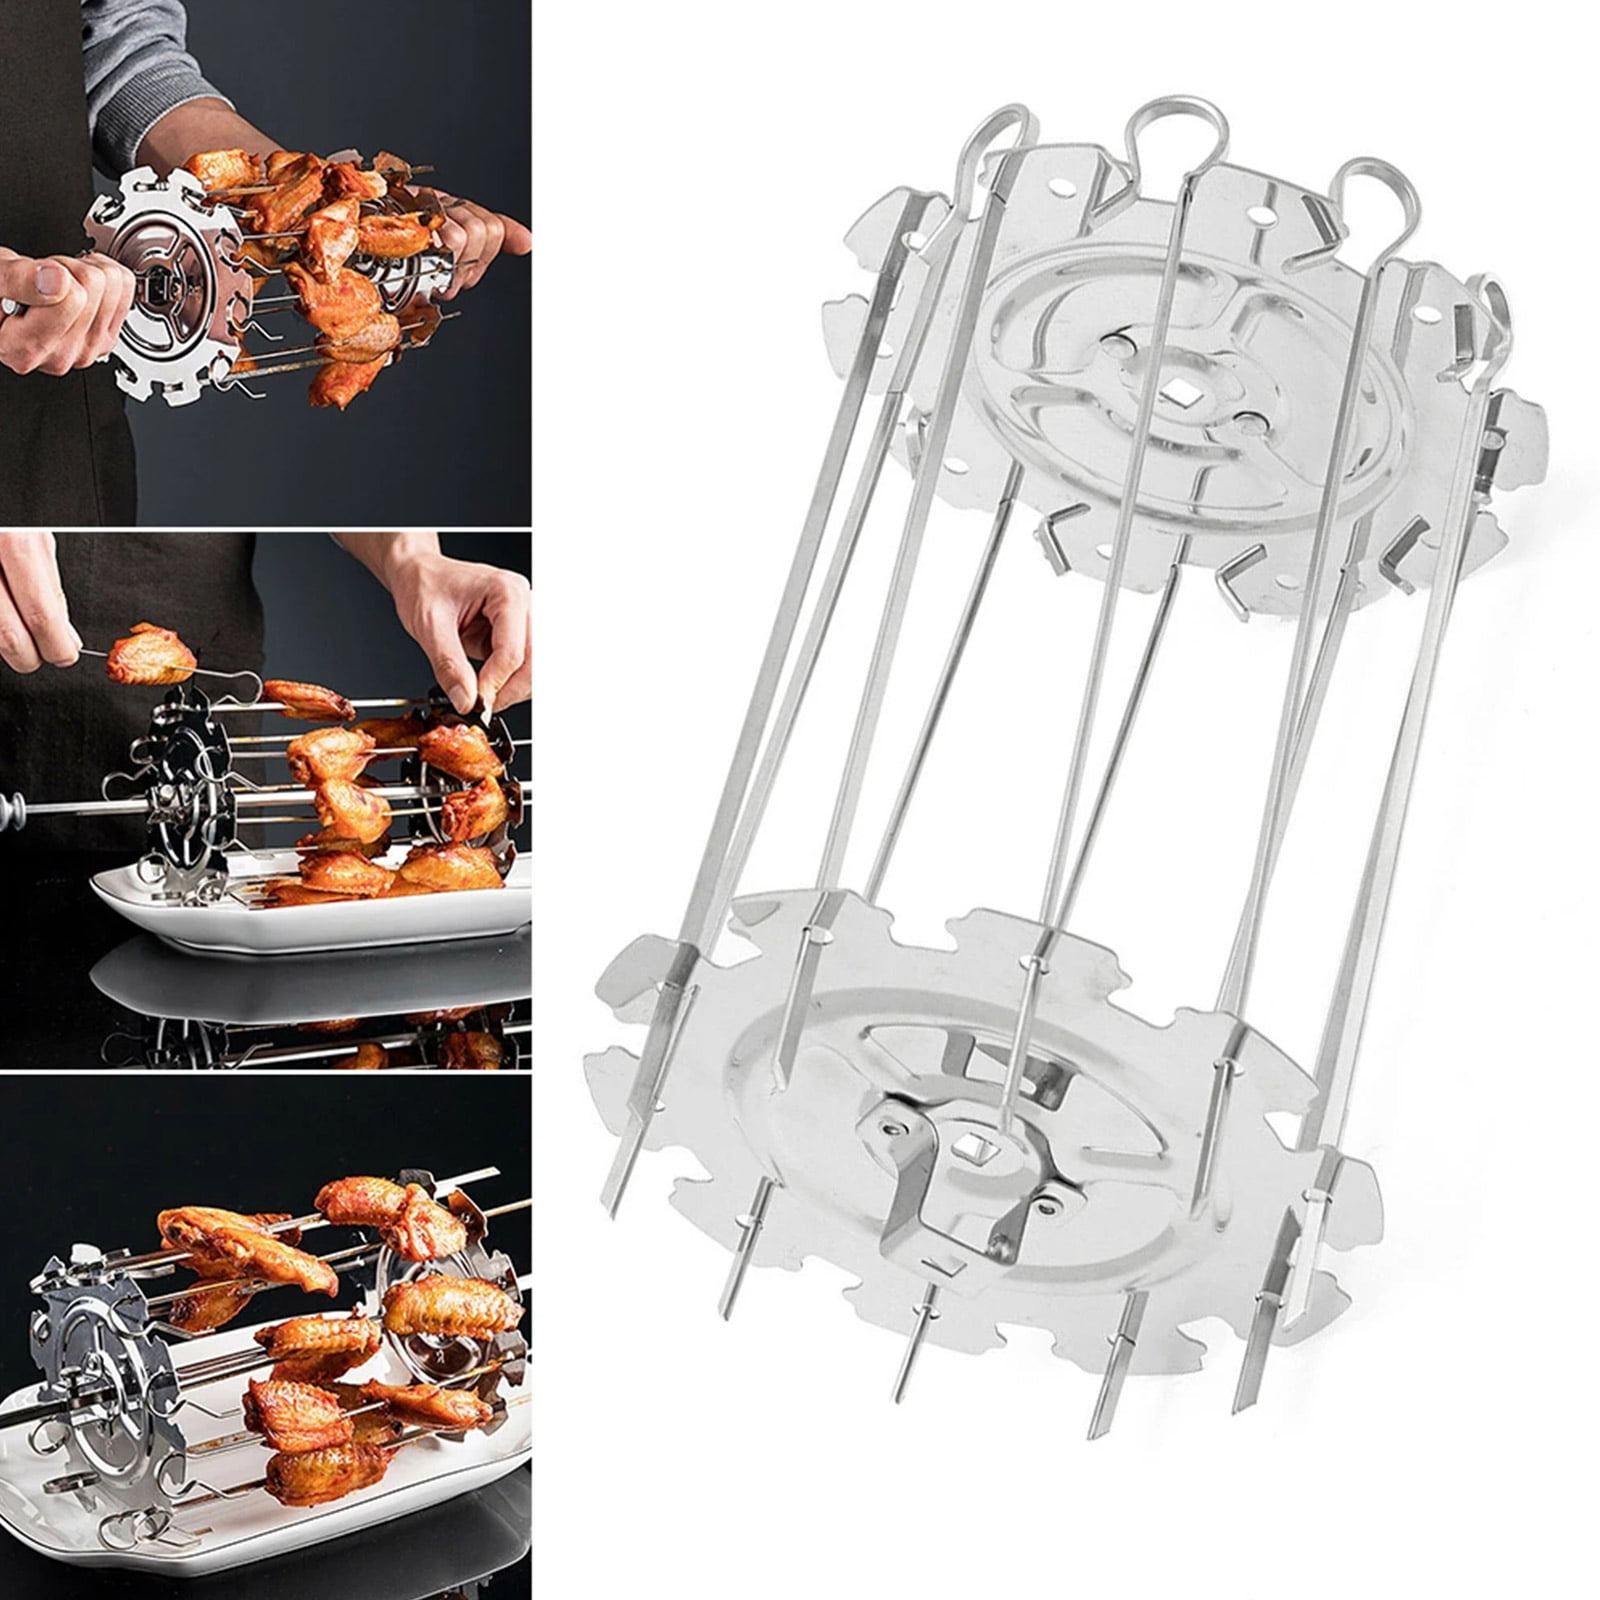 BBQ Kebab Cage Rotisserie Skewer Stainless Steel Grill For Roaster Oven Tools US 